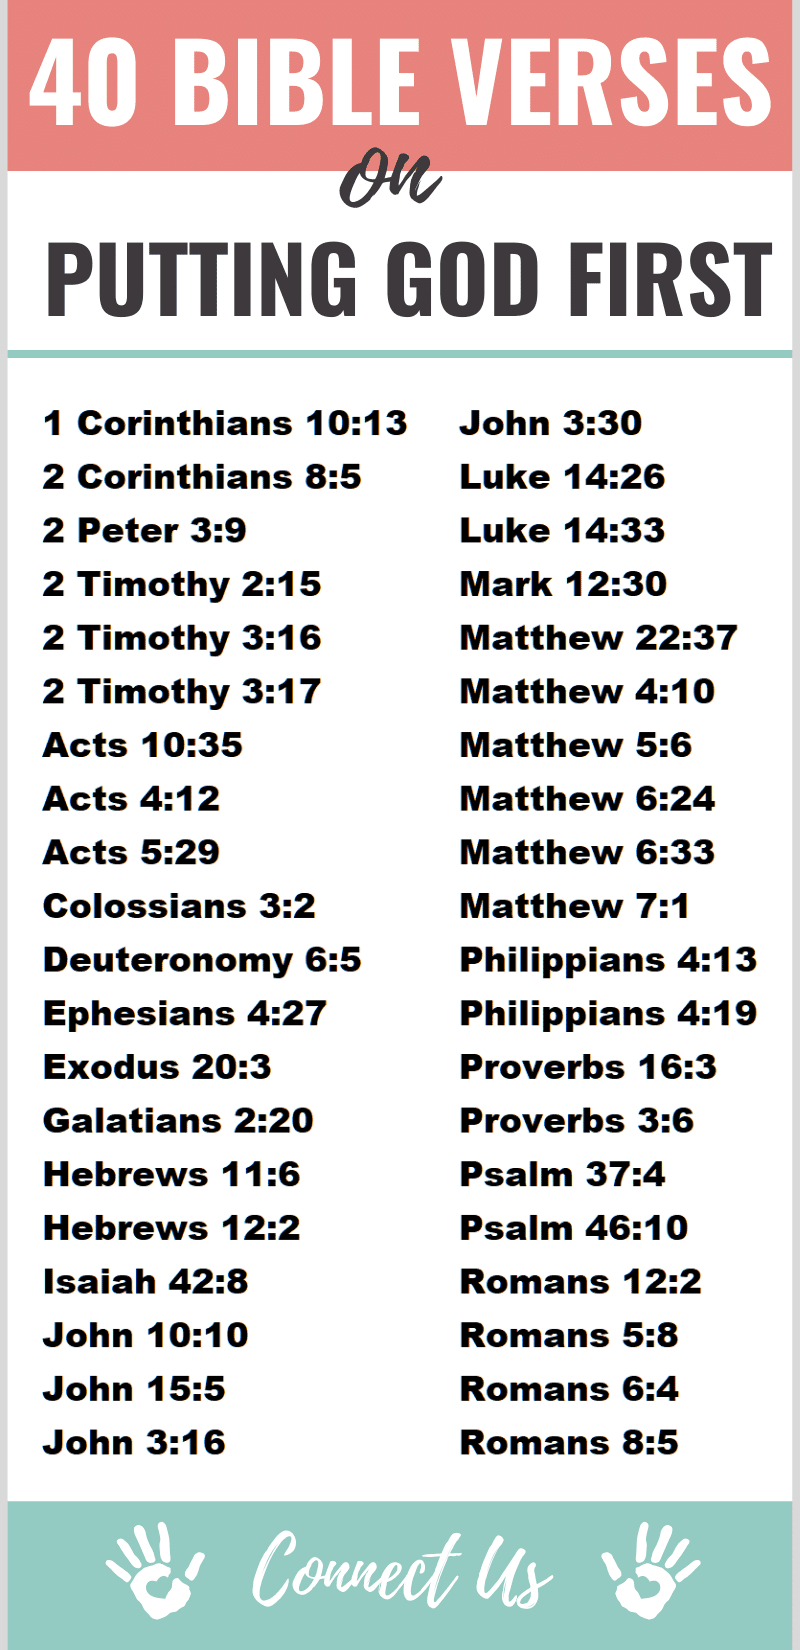 Bible Verses on Putting God First